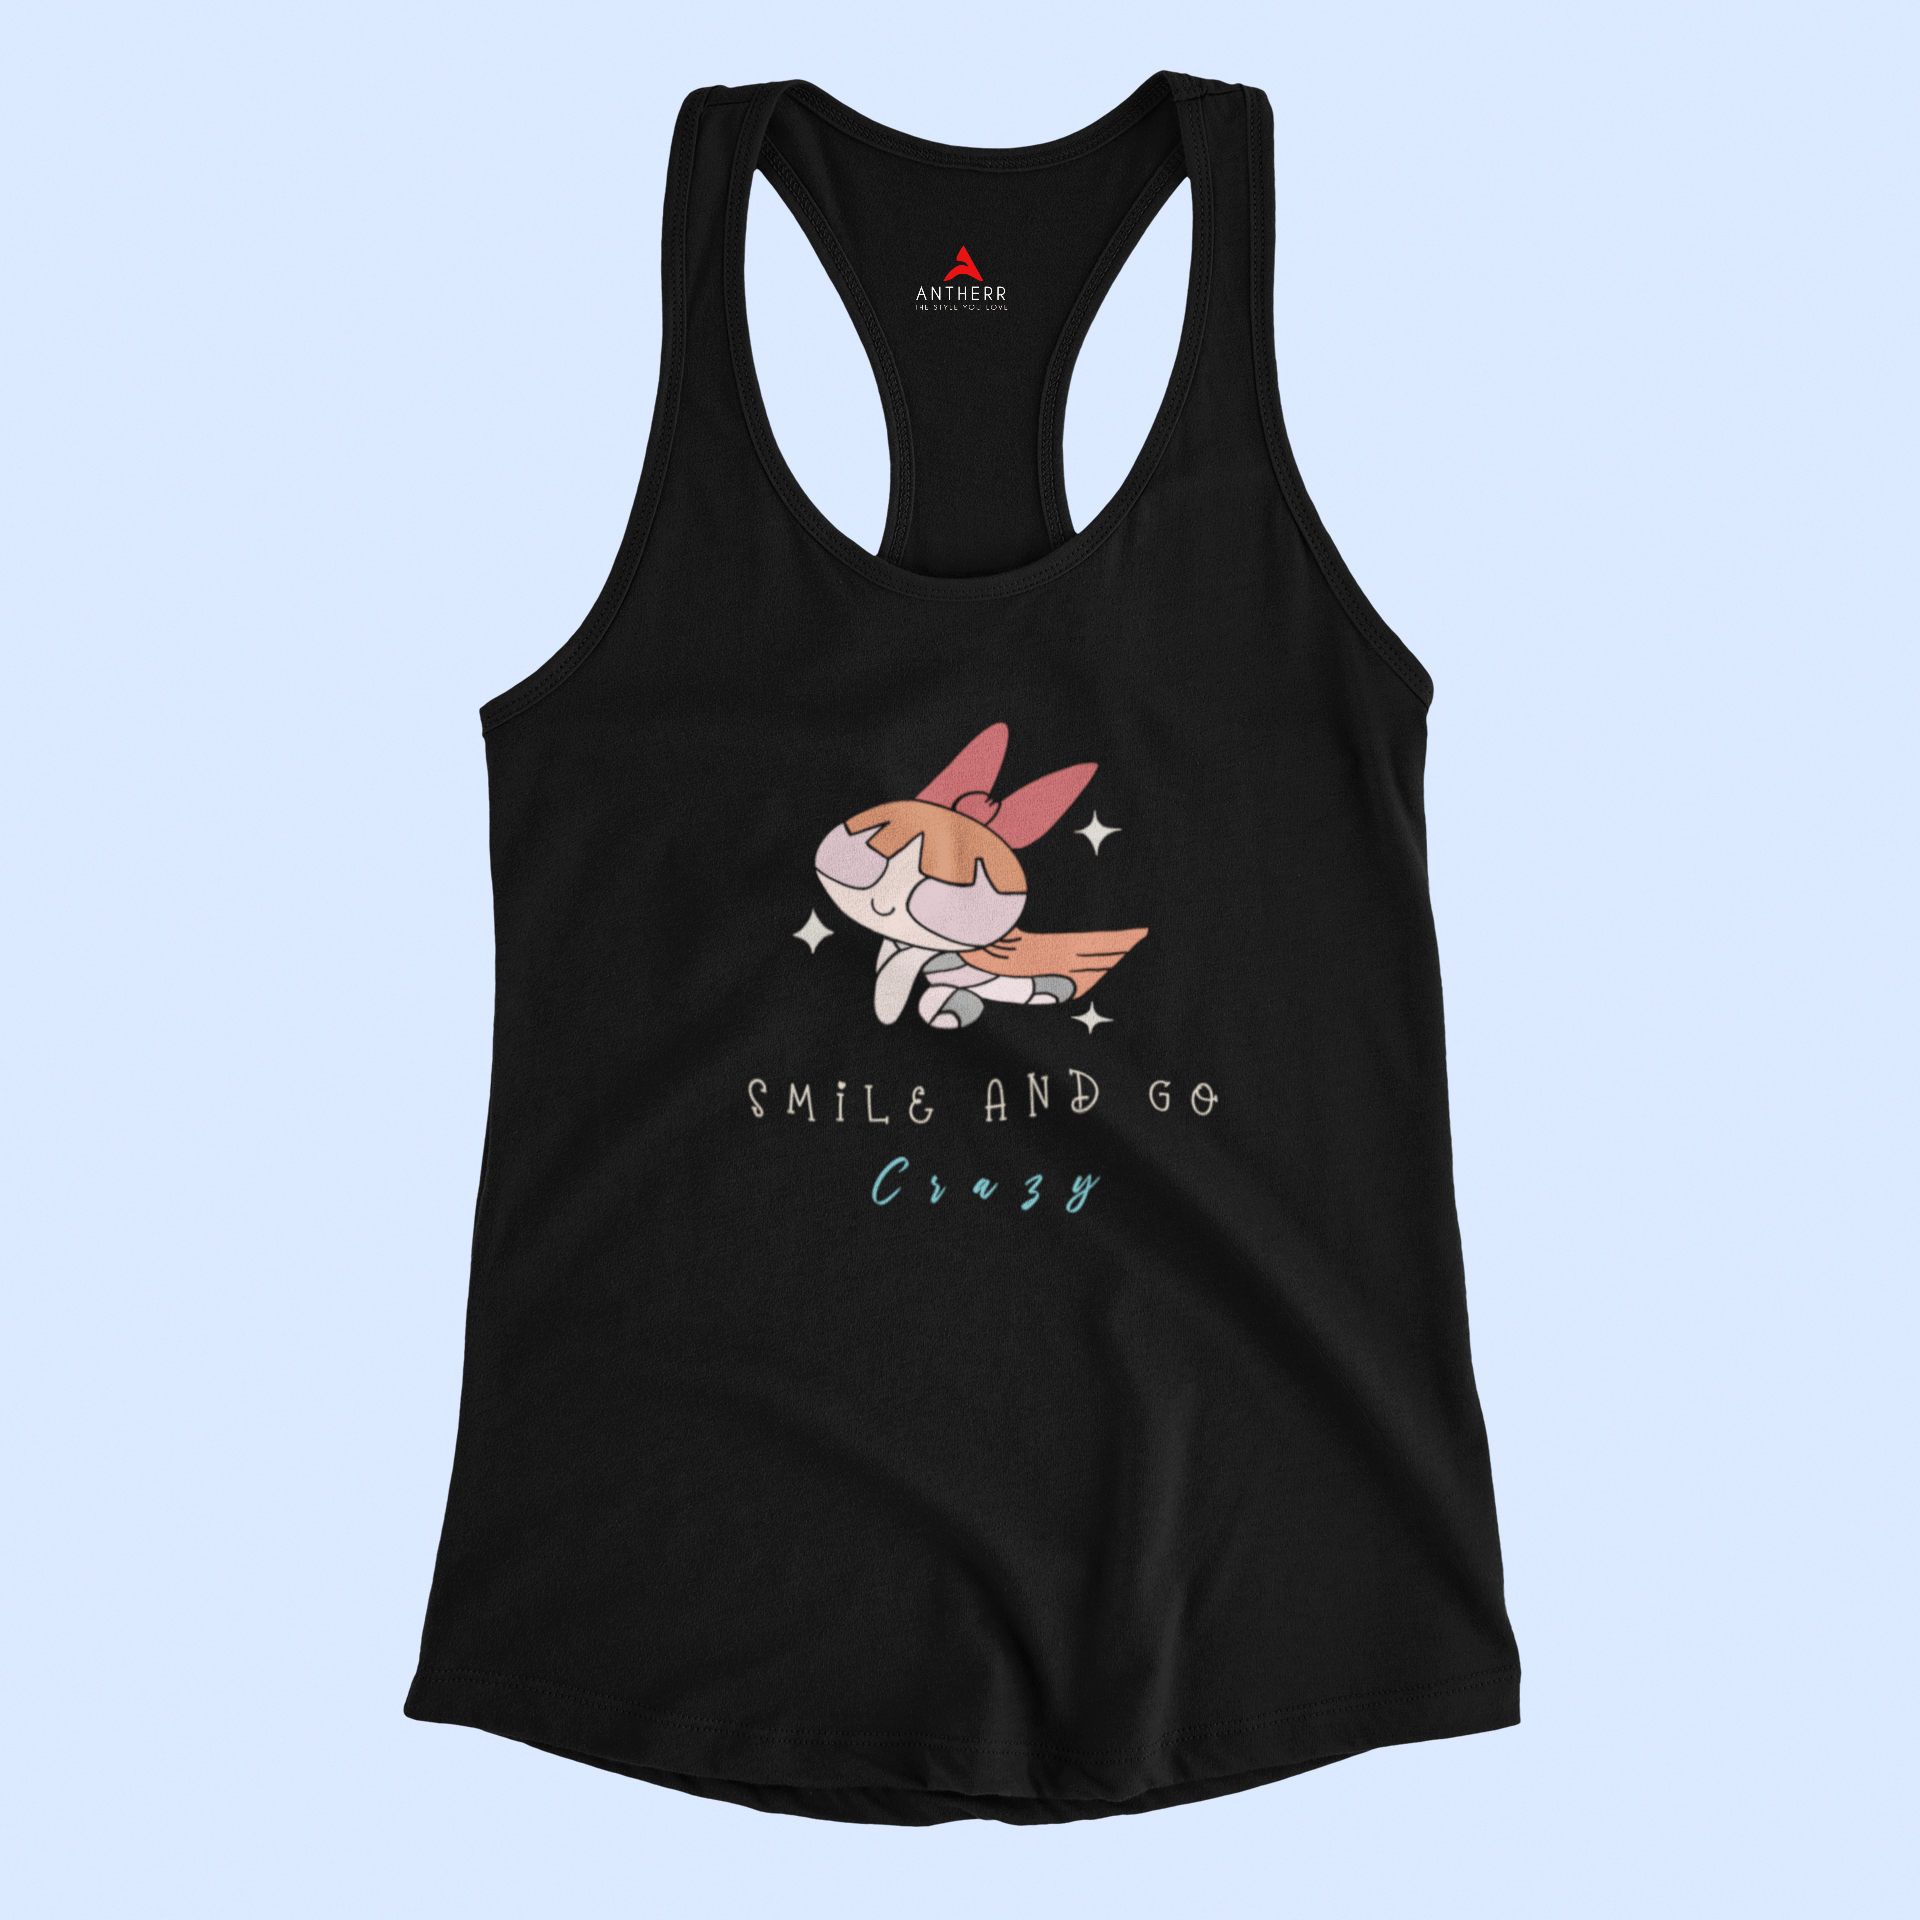 SMILE AND GO CRAZY : POWERPUFFF GIRLS - Tank Tops